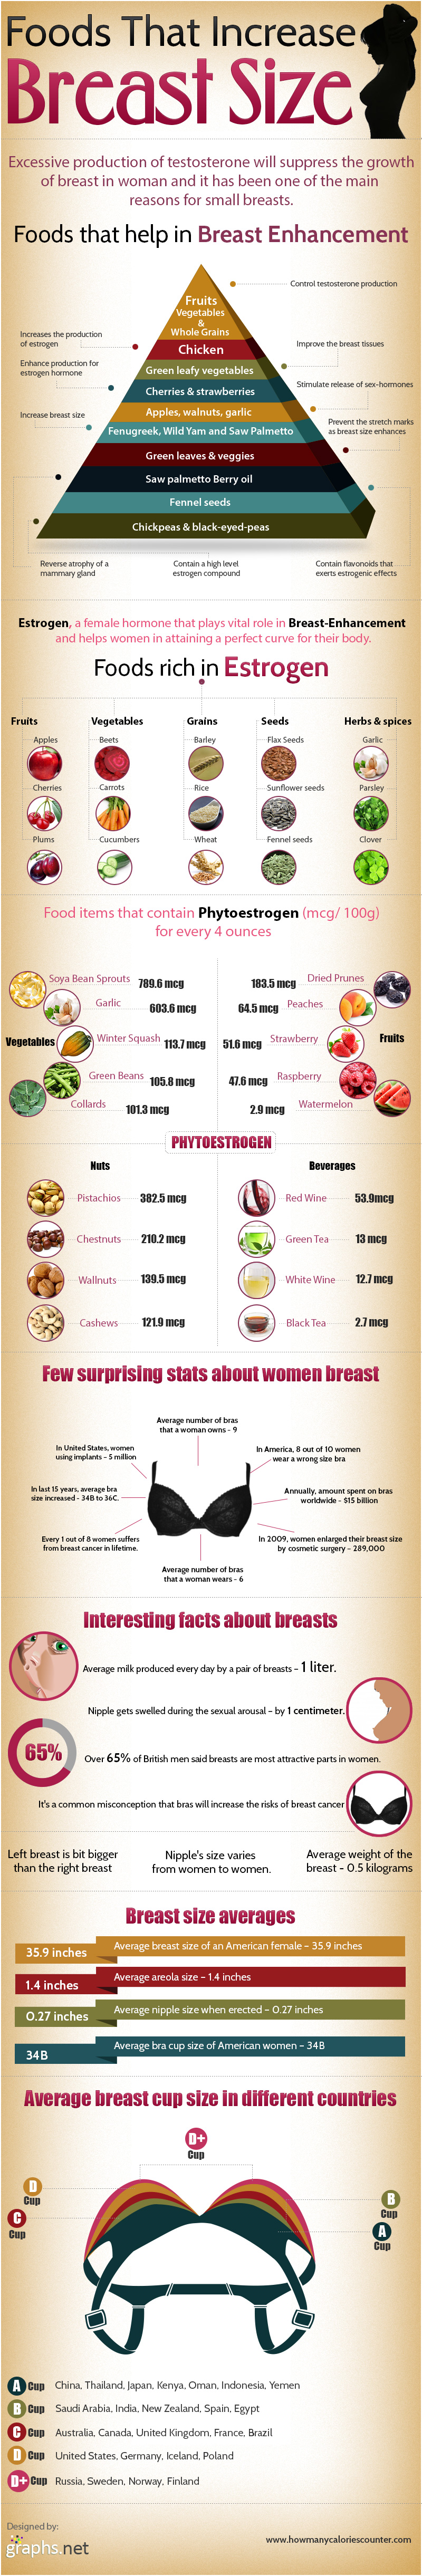 how to increase breast size naturally through food